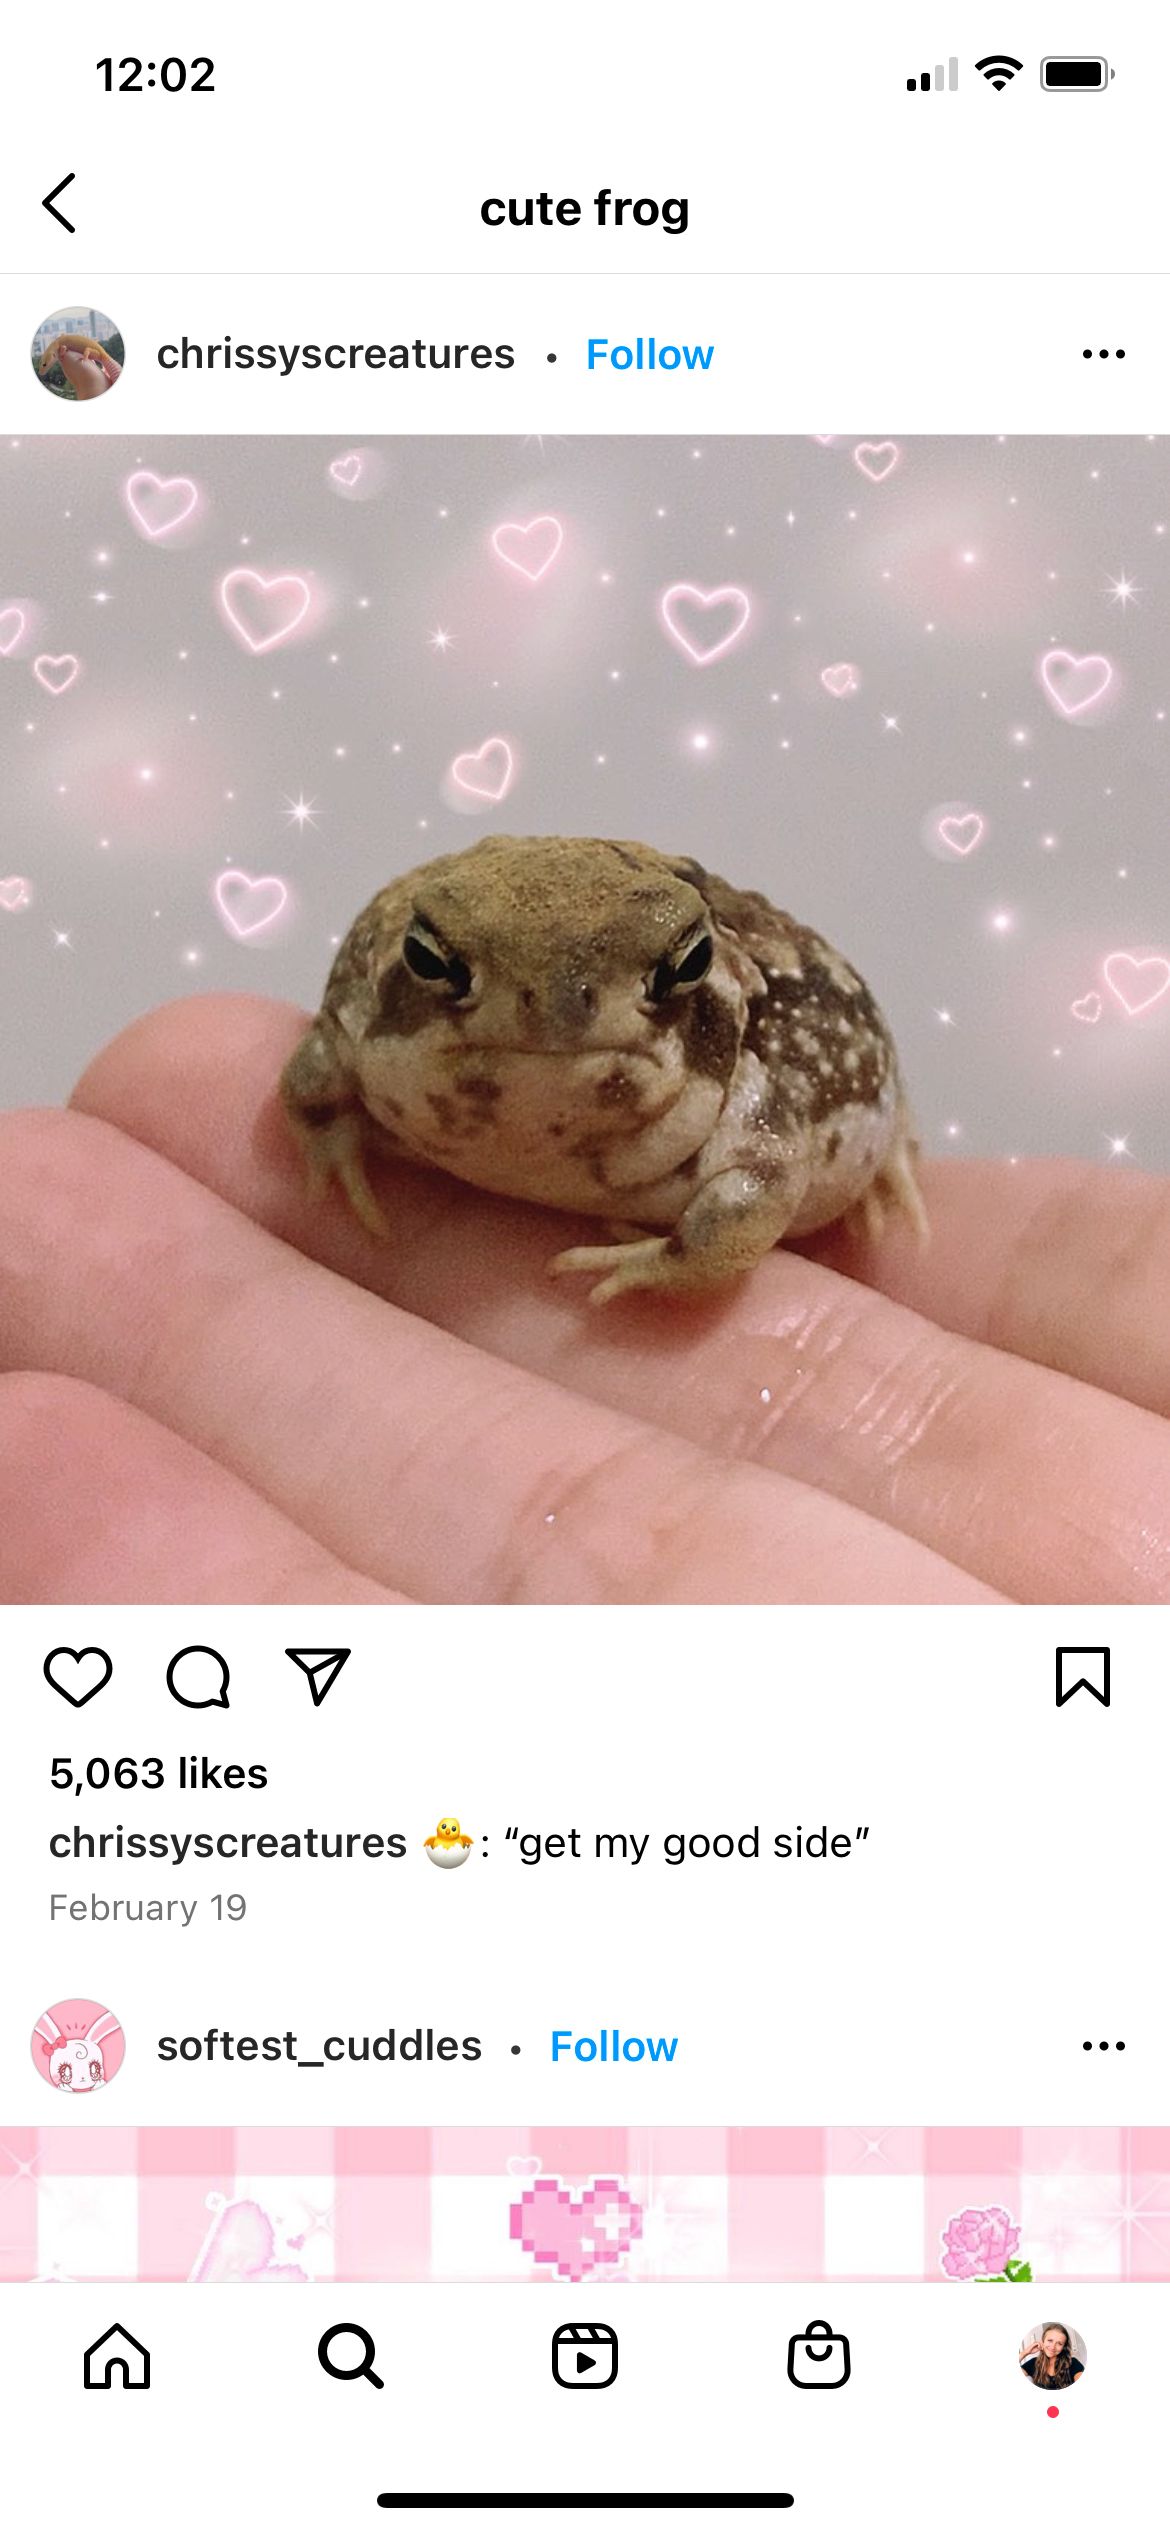 Screenshot of an Instagram post that is a photo of a frog